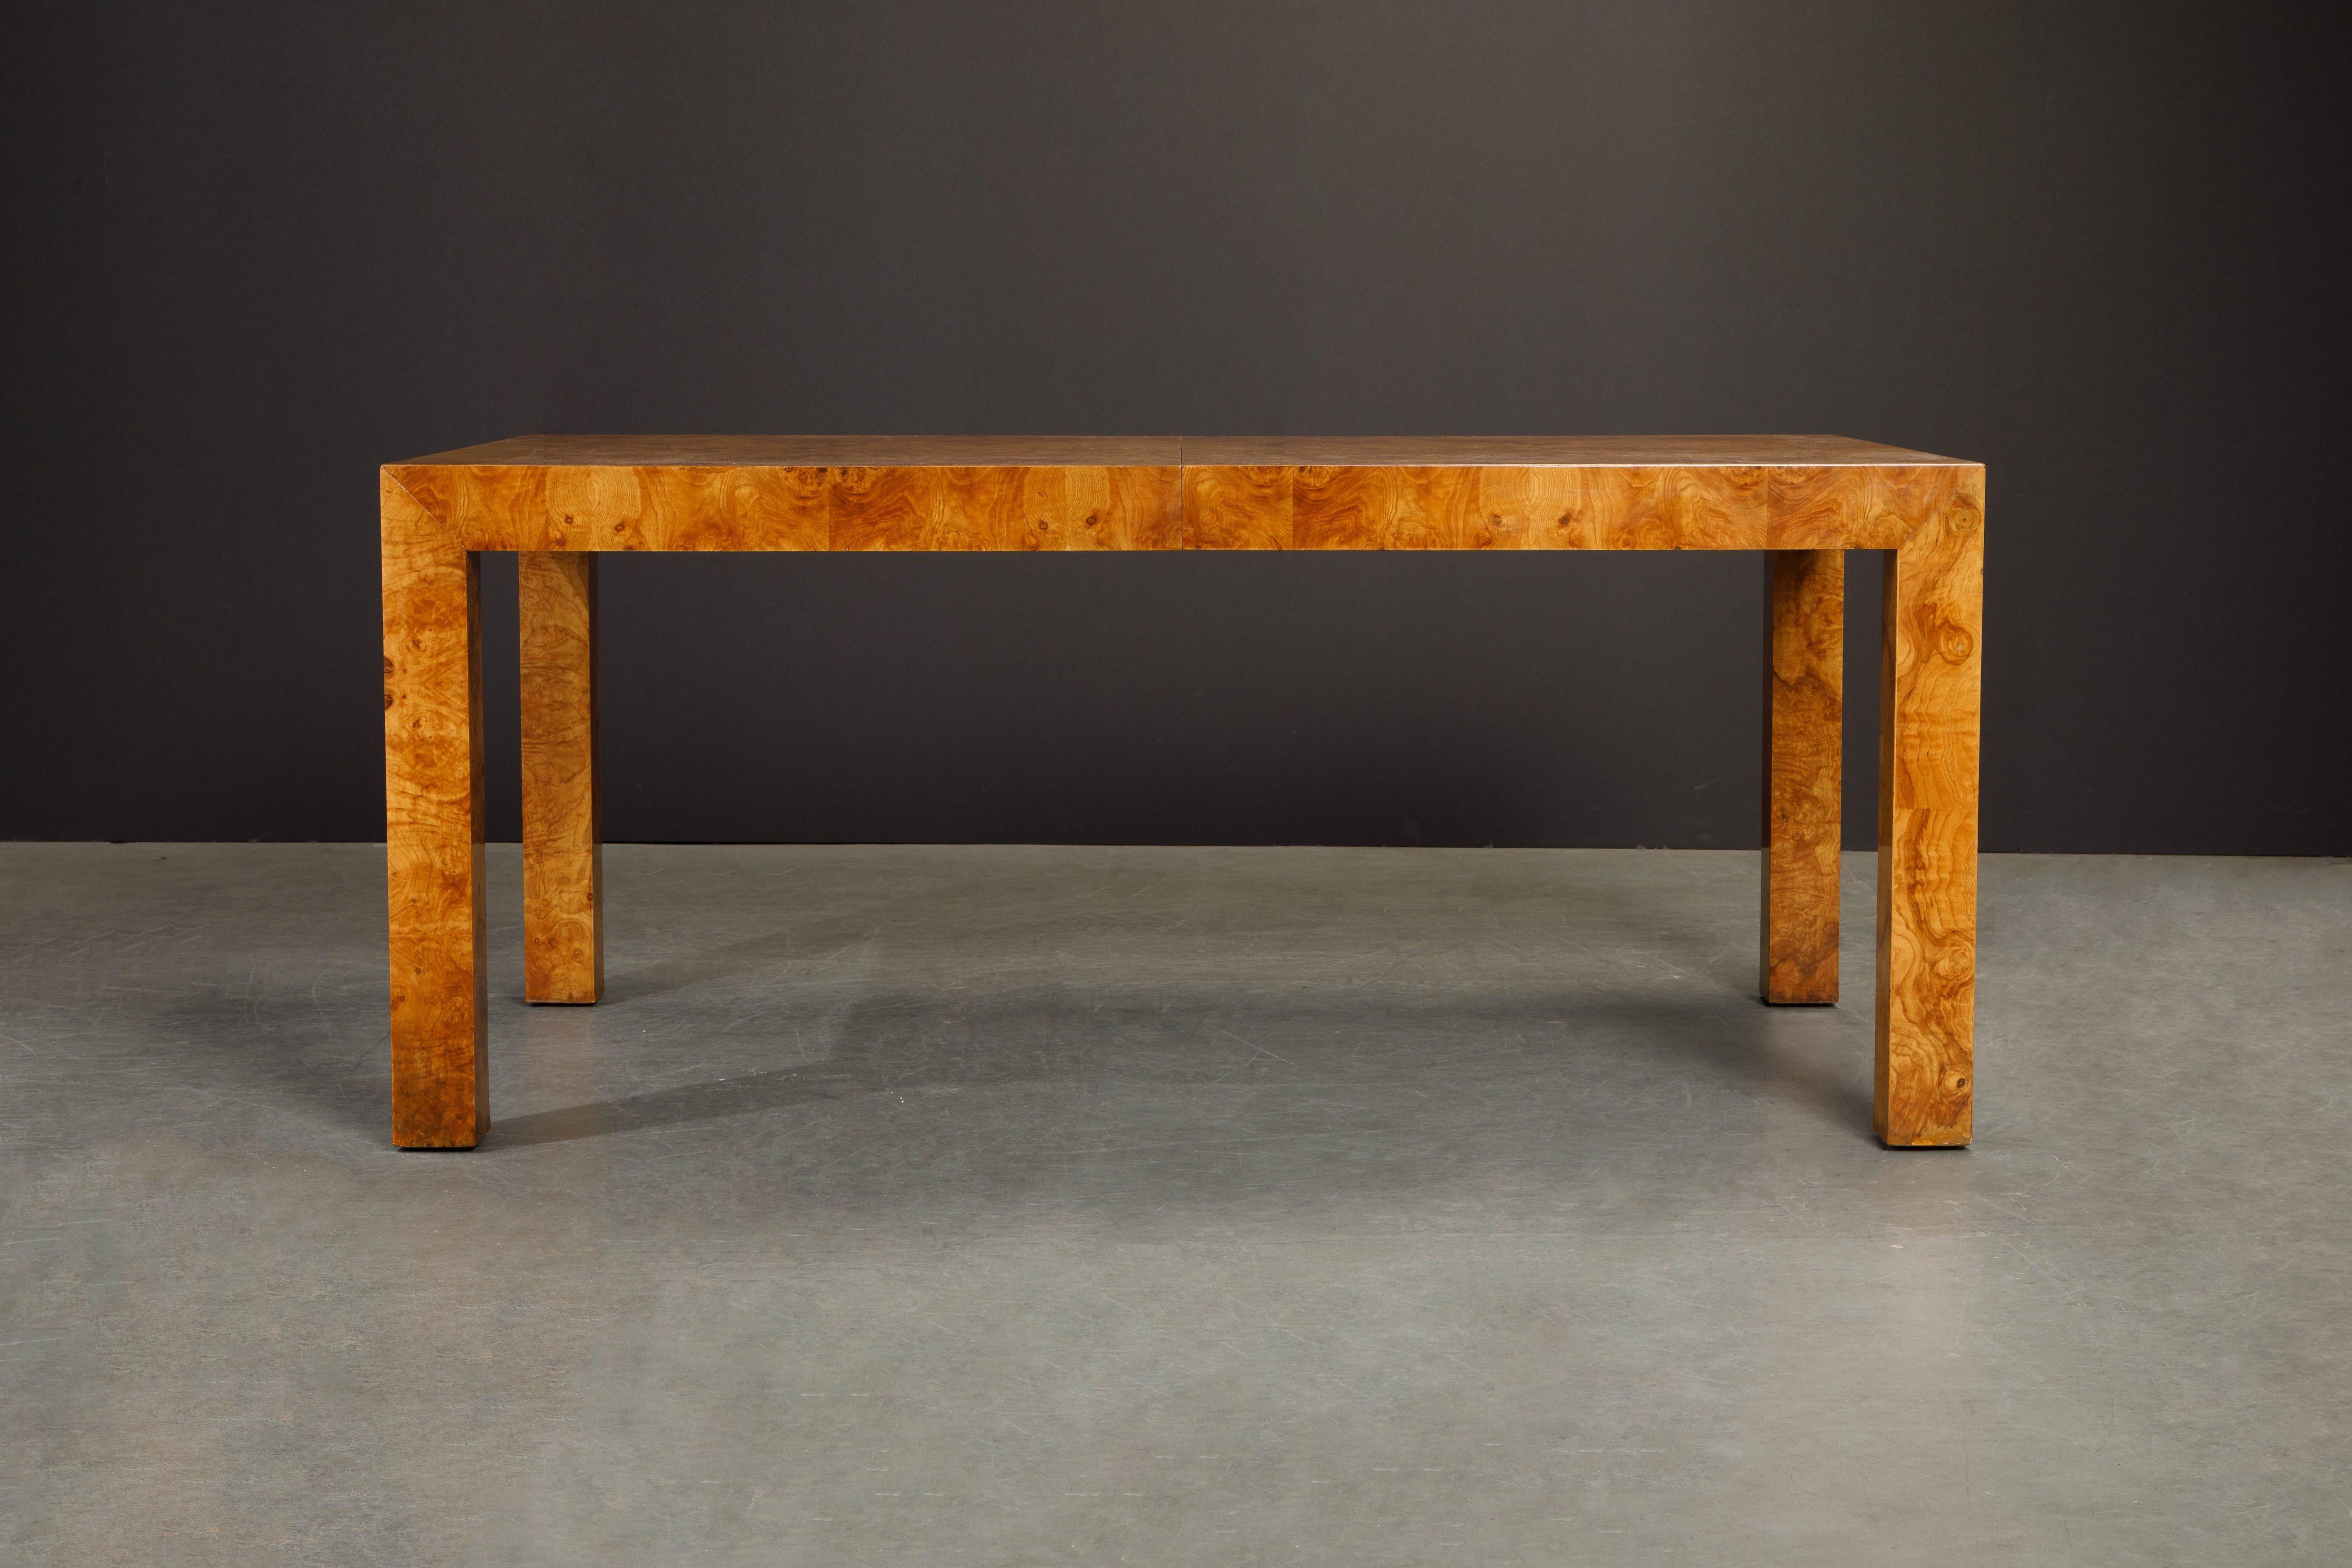 This incredible Milo Baughman for Thayer Coggin extendable dining table with gorgeous burled wood grain was newly refinished in a luxurious deep French Polish lacquer - which is an expensive and labor intensive process but the results are nothing